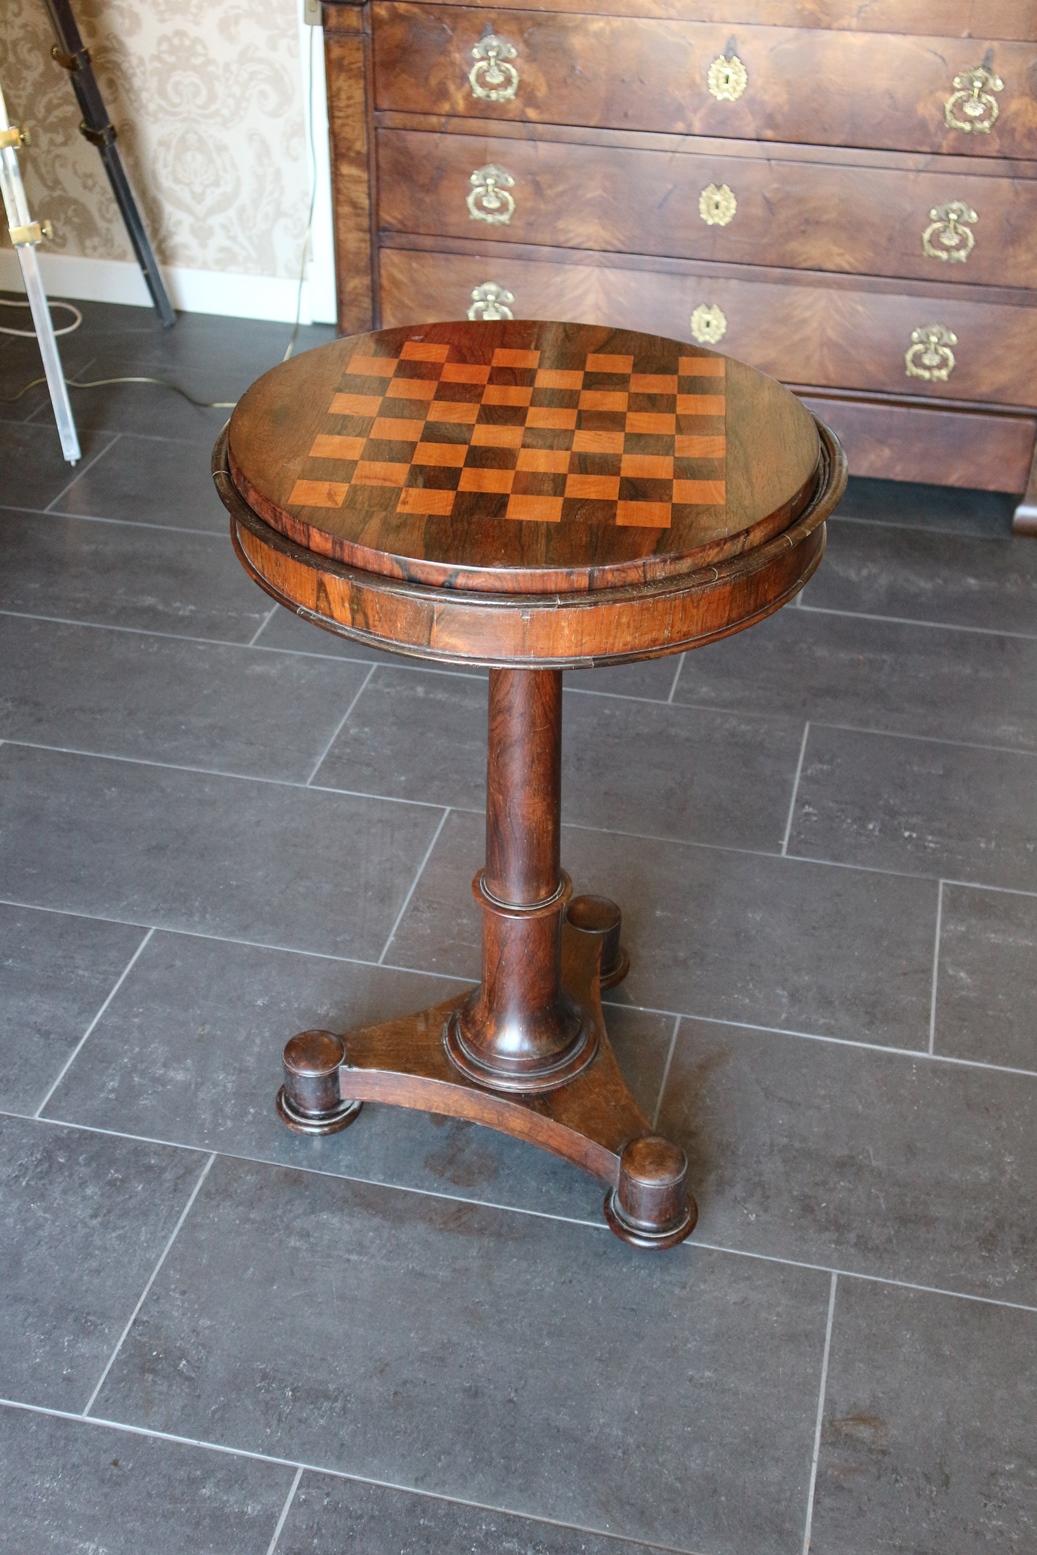 Beautiful 18th century antique mahogany chess table in original condition. The sheet is reversible. With a chessboard on one side and mahogany on the other side. There is also a removable metal inner box.
Entirely in original condition. On the